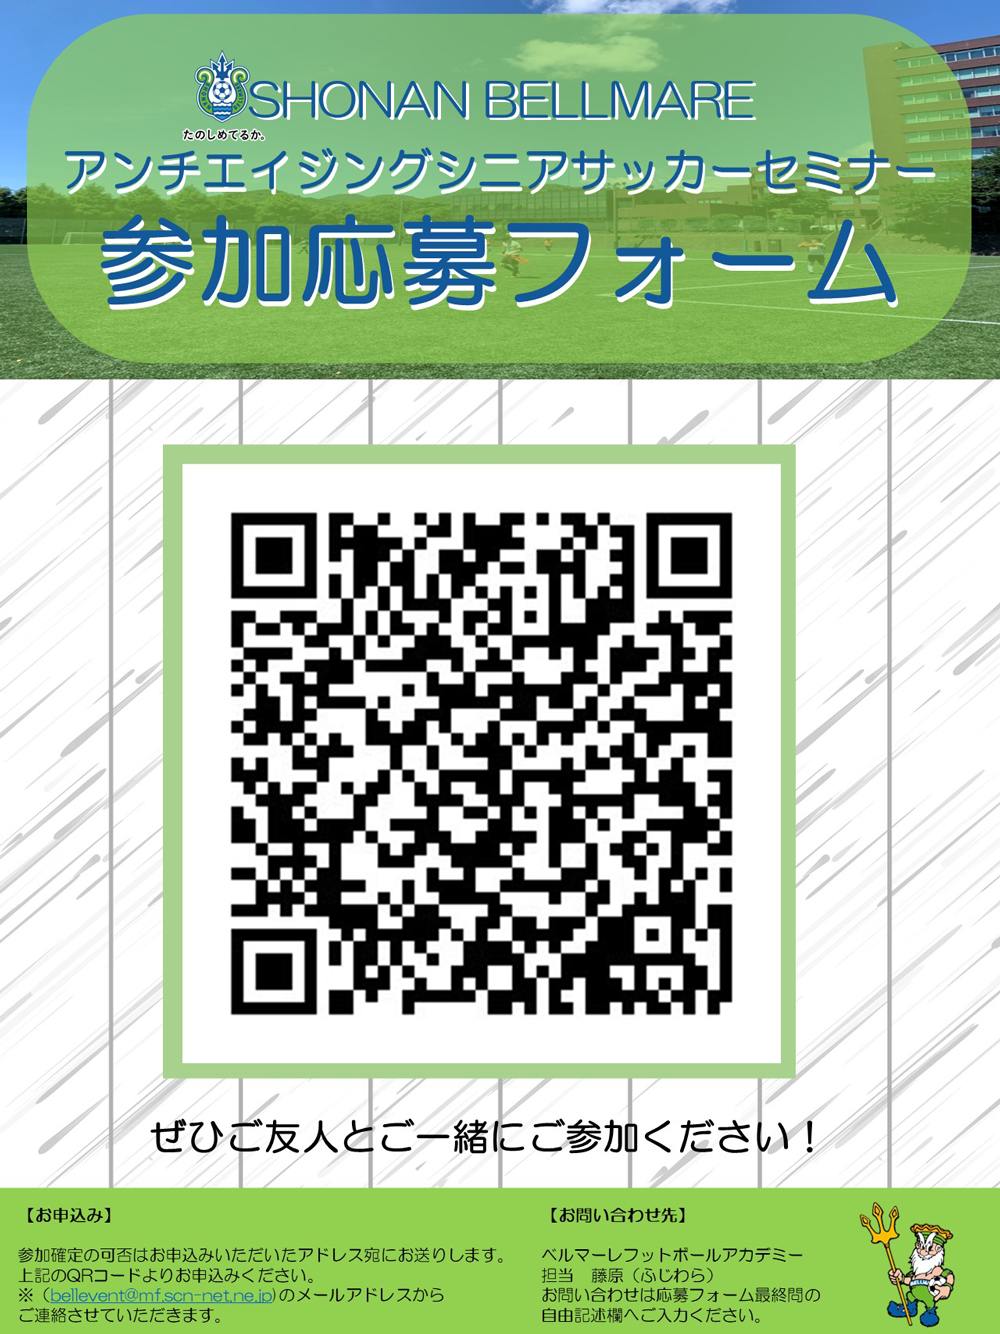 http://www.bellmare.or.jp/soccer/news/upload_files/fb220730_01_01.png